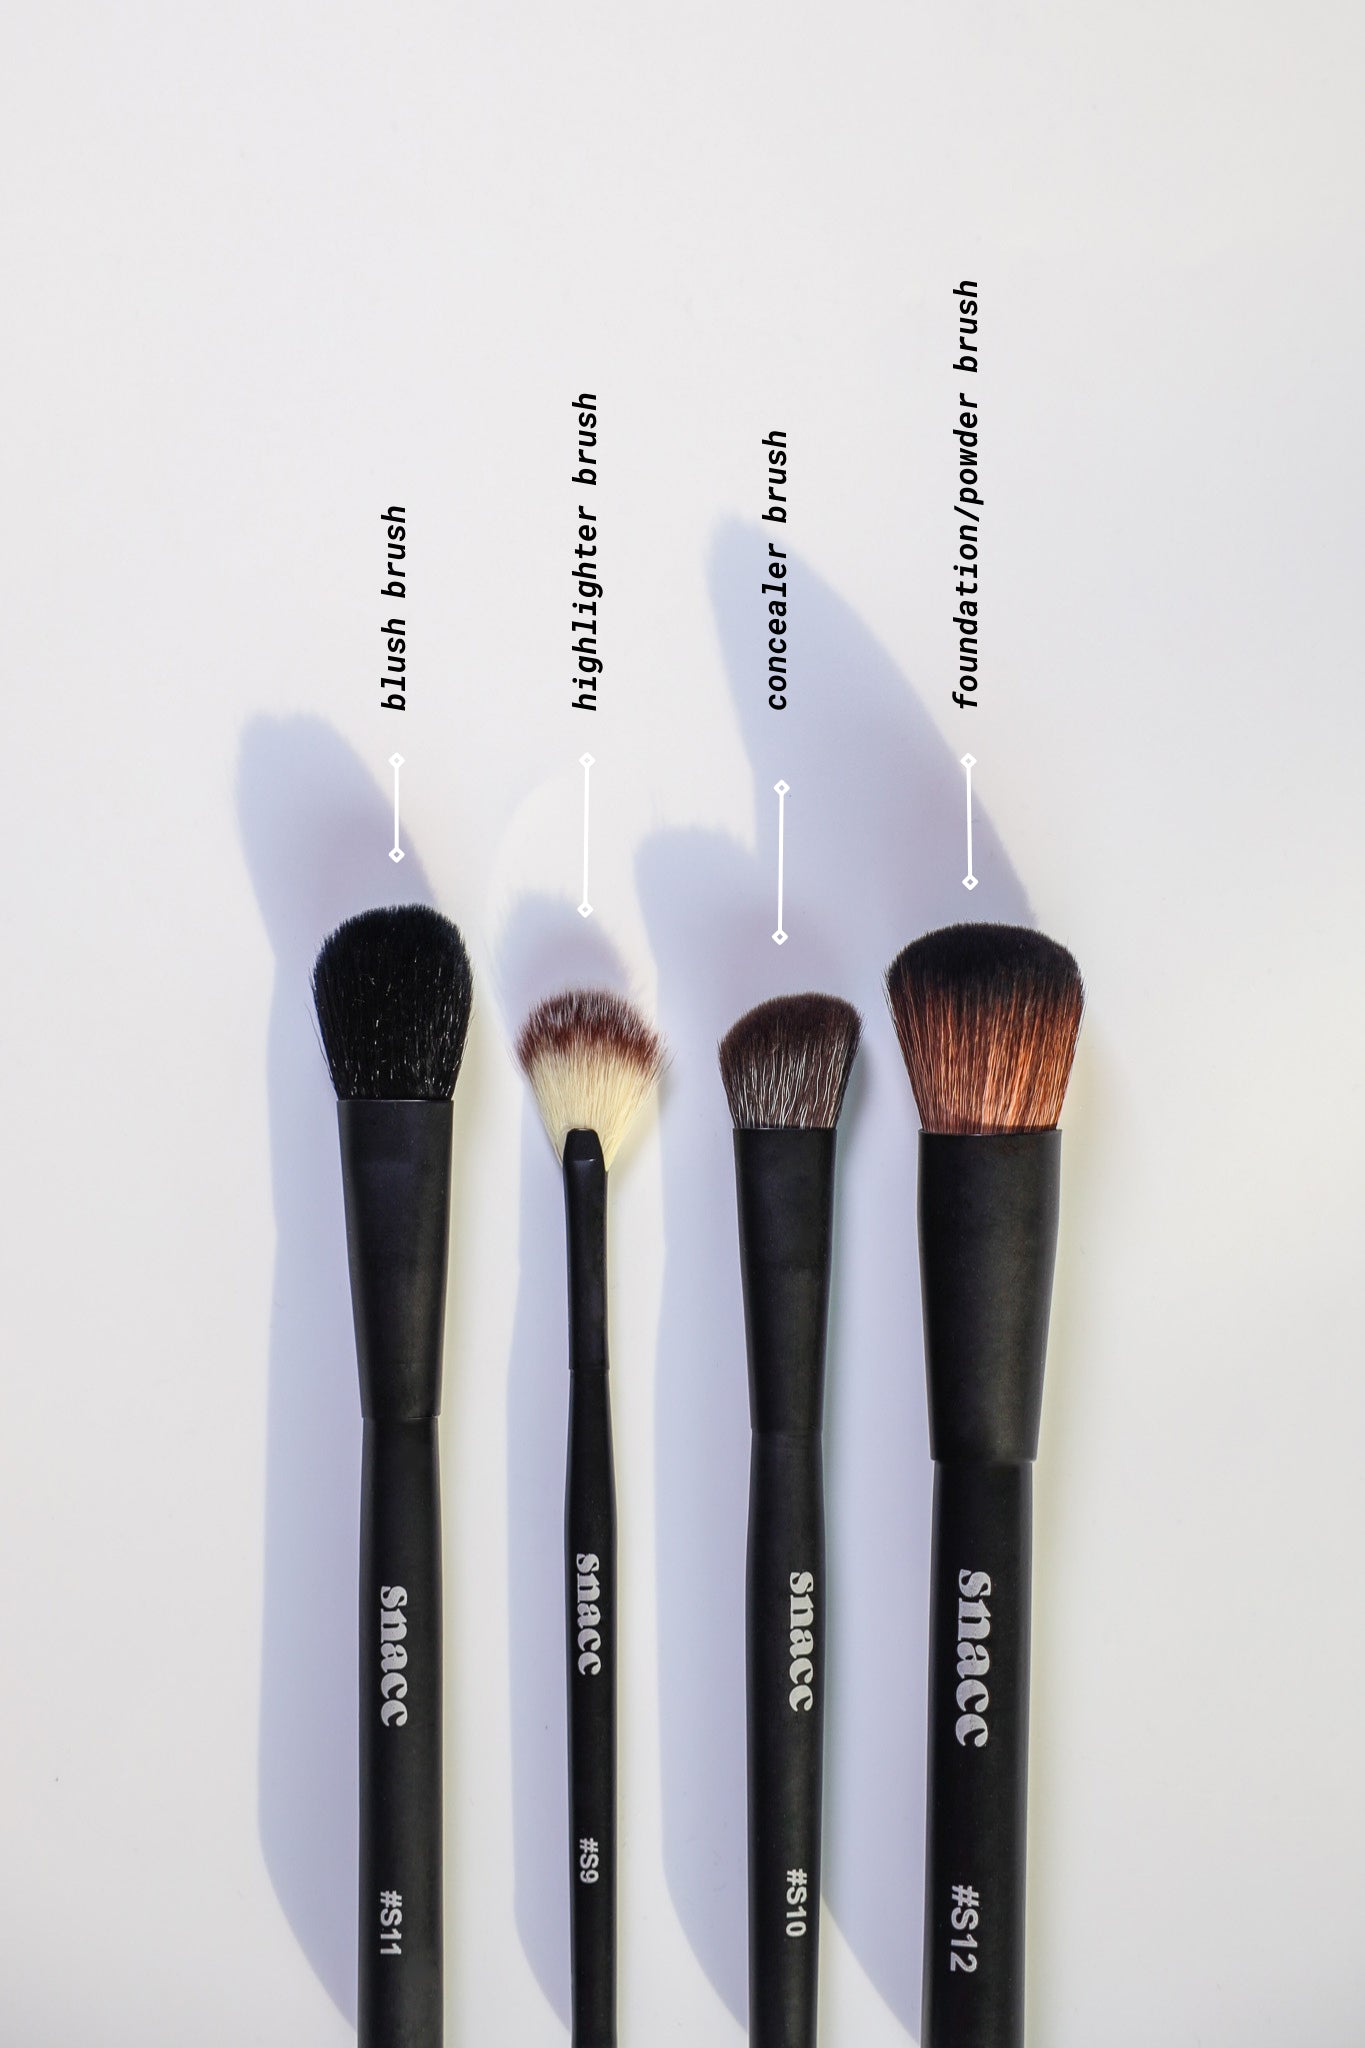 midnight snacc face makeup brushes - set of 4 brushes